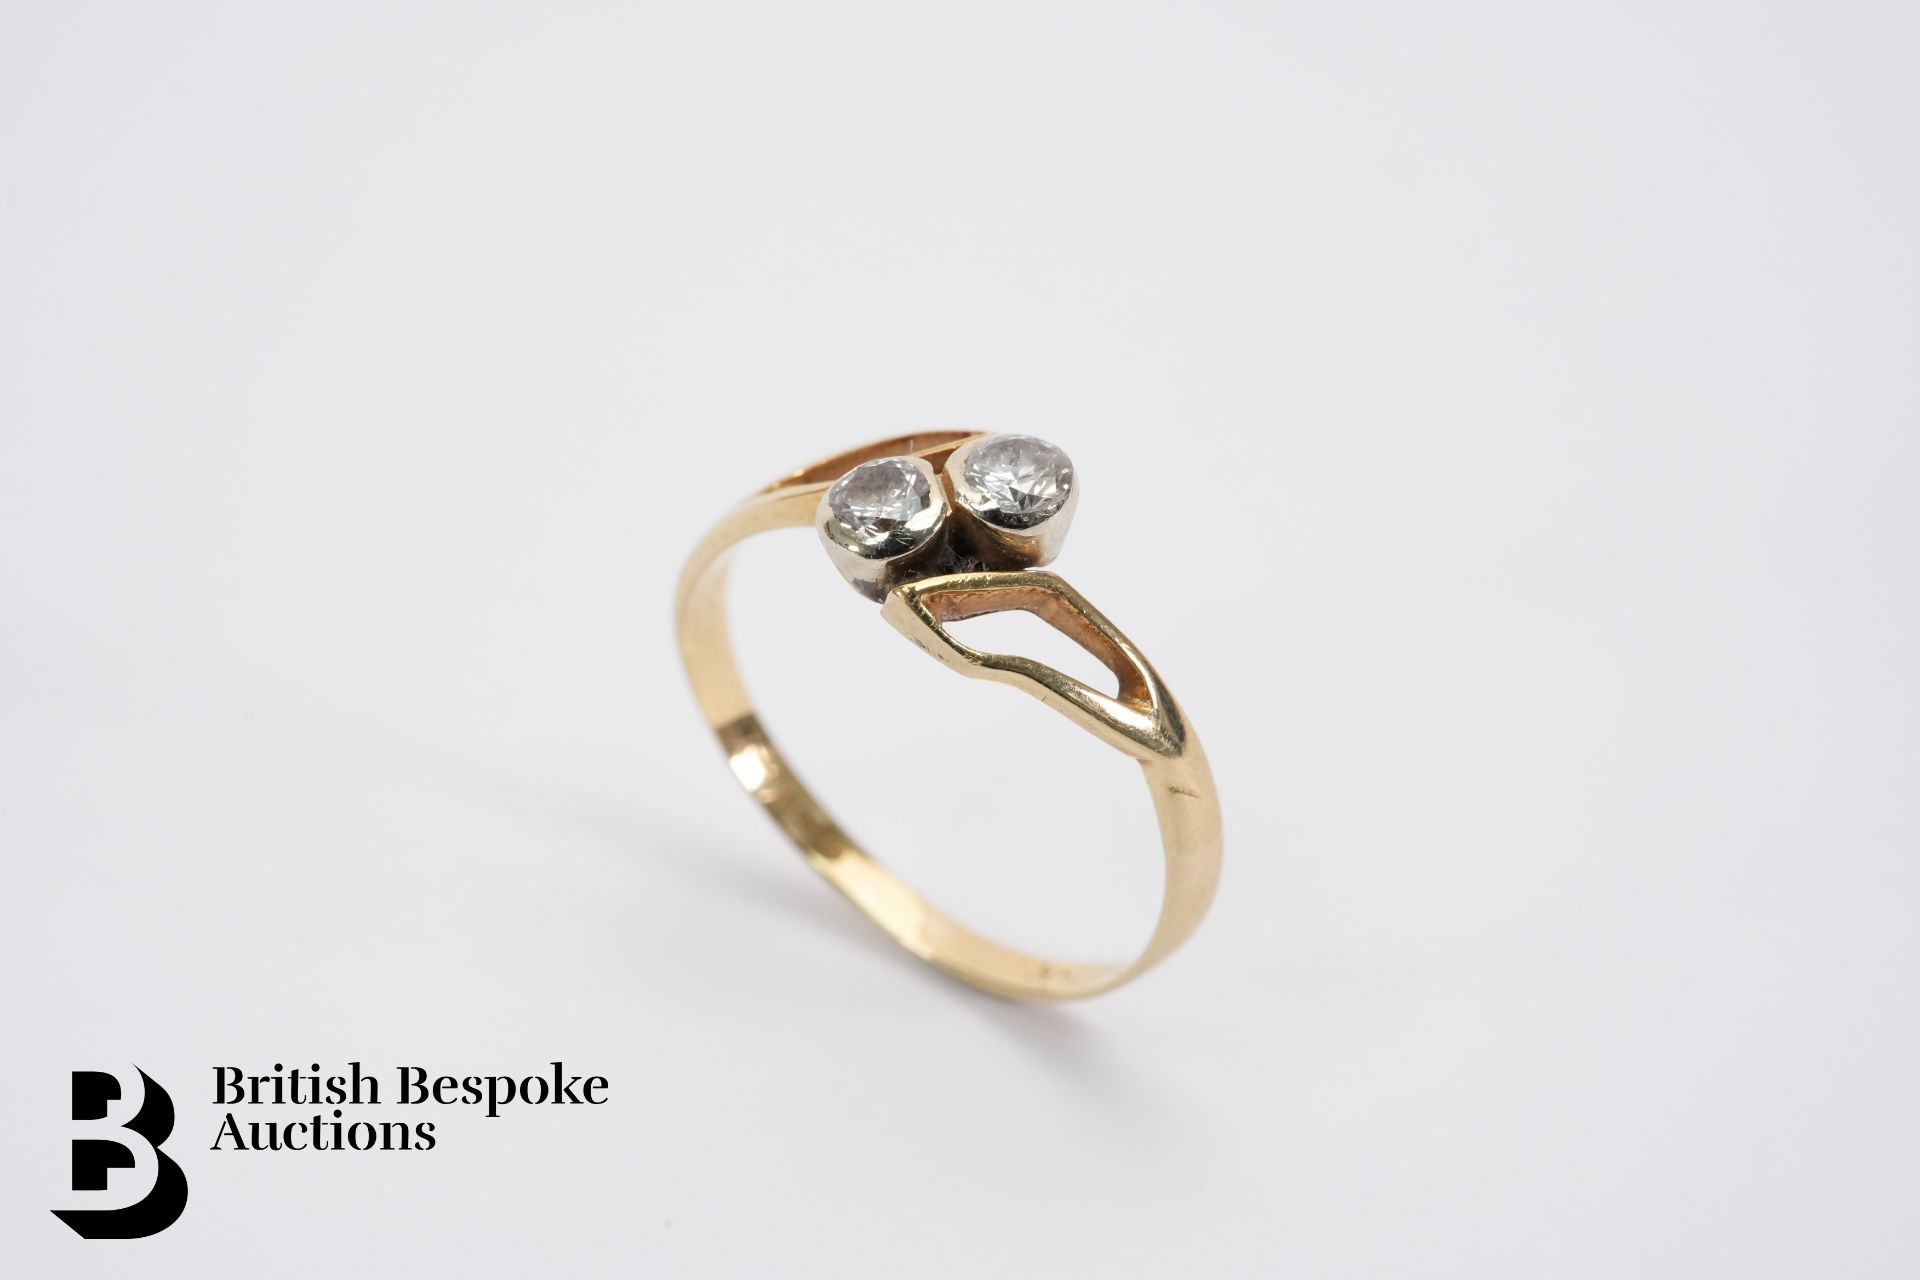 14ct Gold Two Stone Diamond Ring - Image 2 of 2